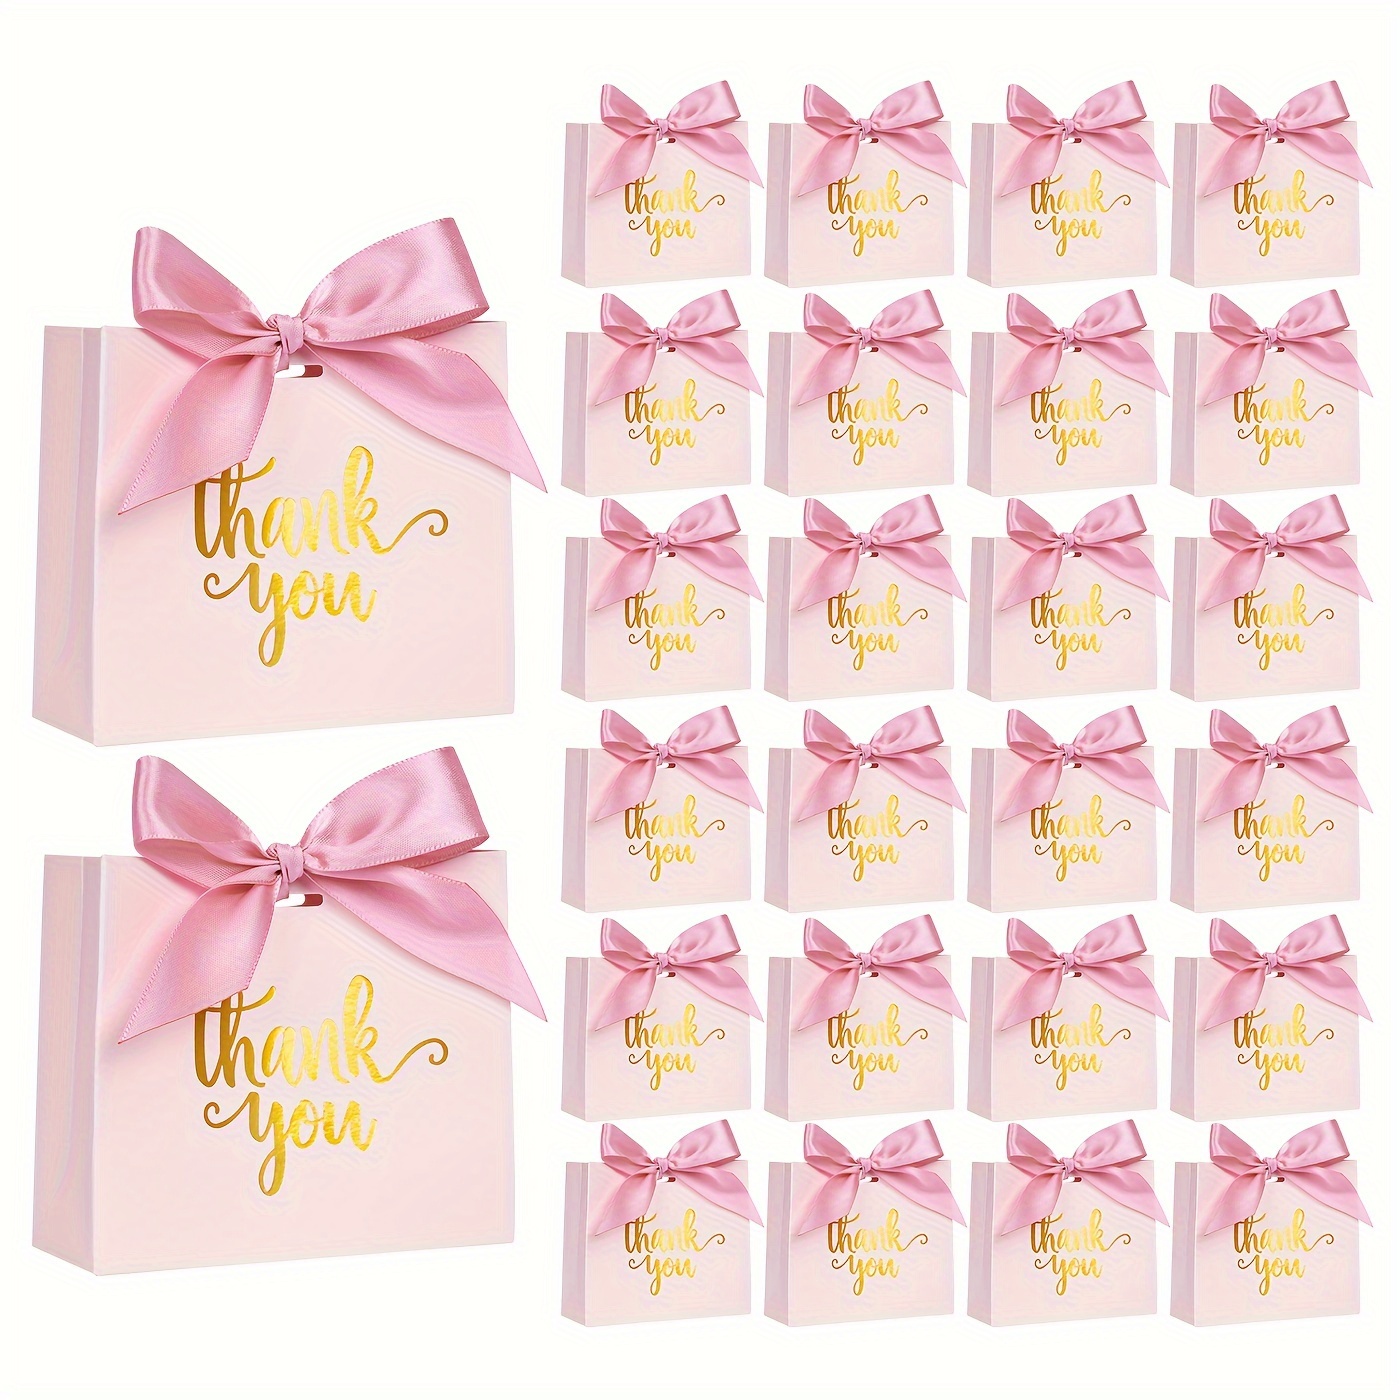 

24 Packs, Small Thank You Gift Bags, Mini Candy Bags With Pink Bow Ribbon For Baby Showers, Birthdays, Weddings, And Bridesmaid Celebrations, 4.5x3.9x1.8inch